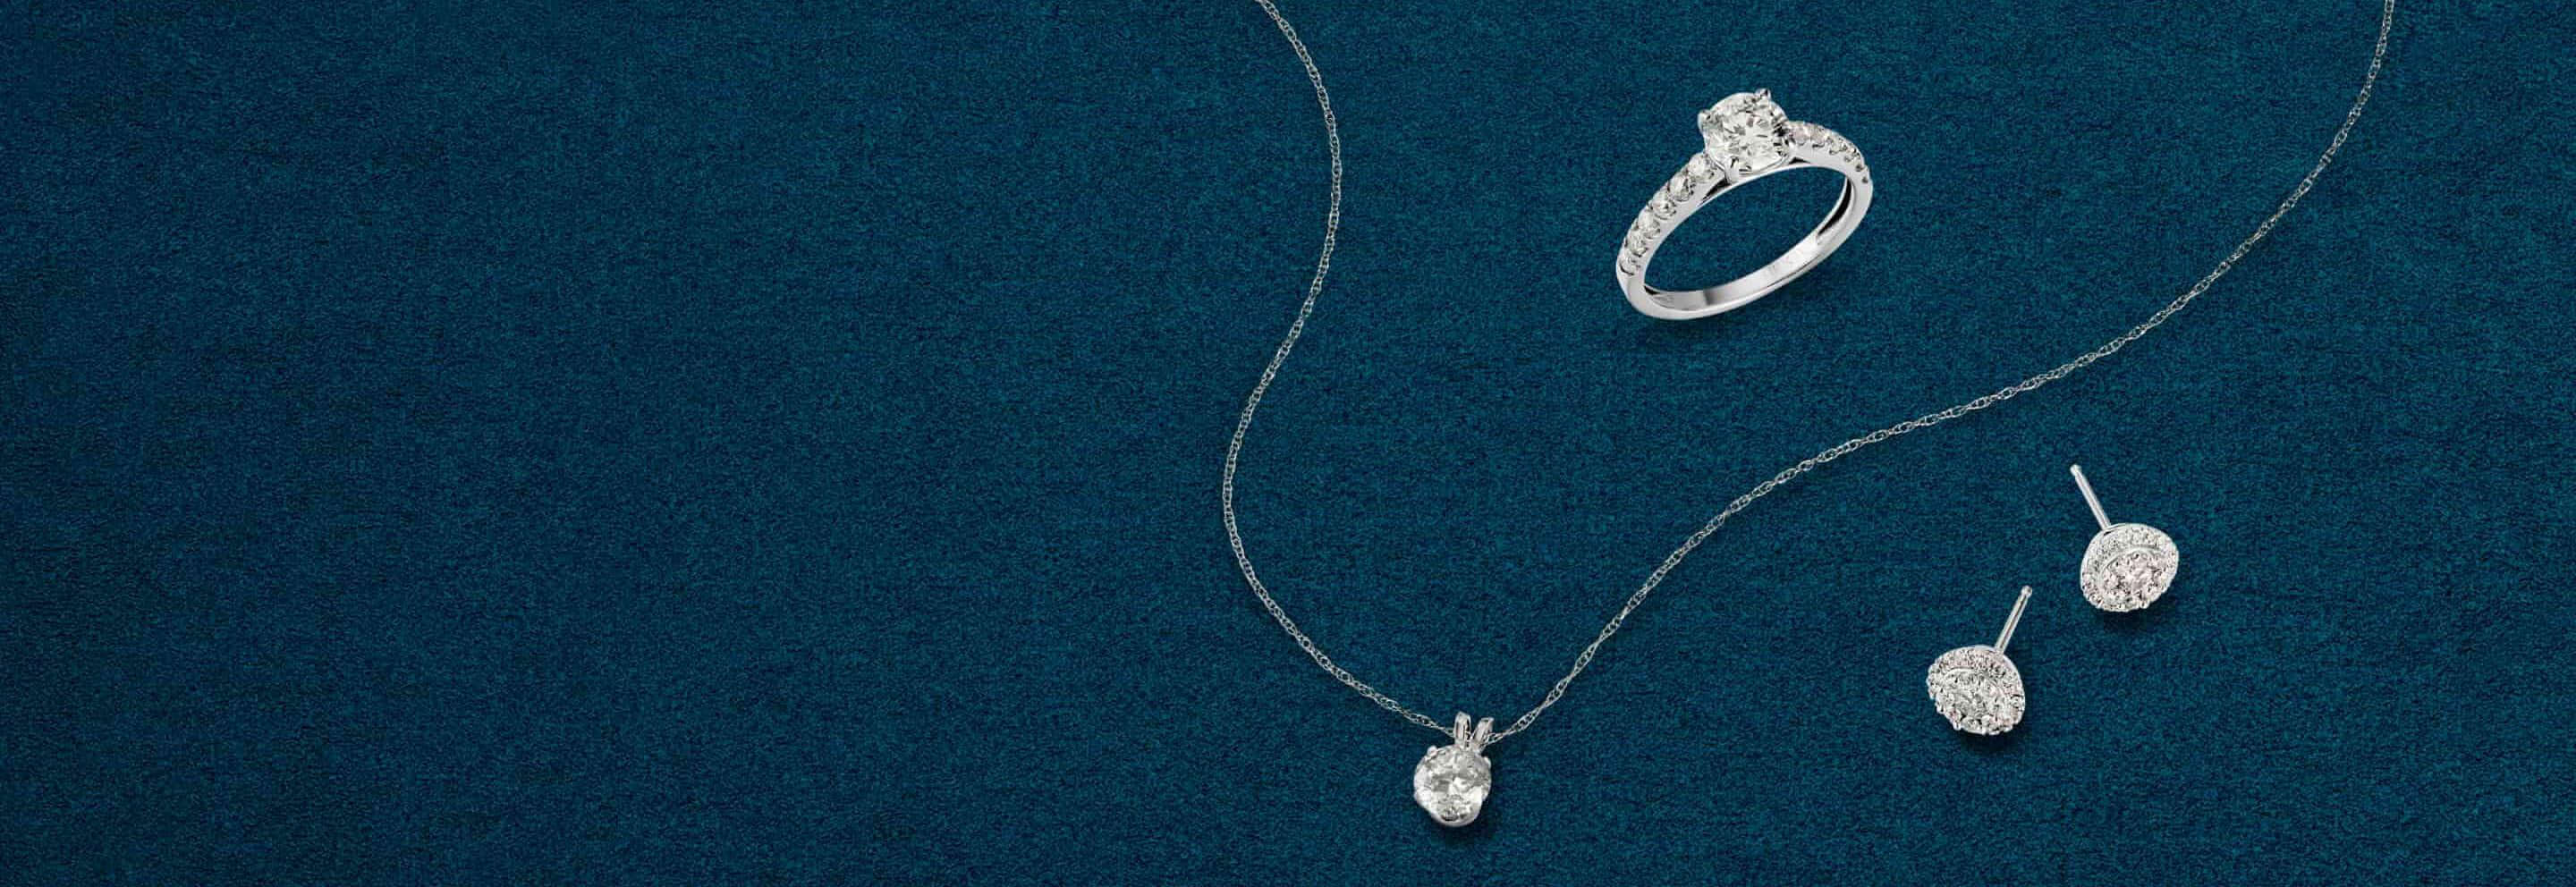 Diamond earrings, ring, and pendant with chain against a dark blue background